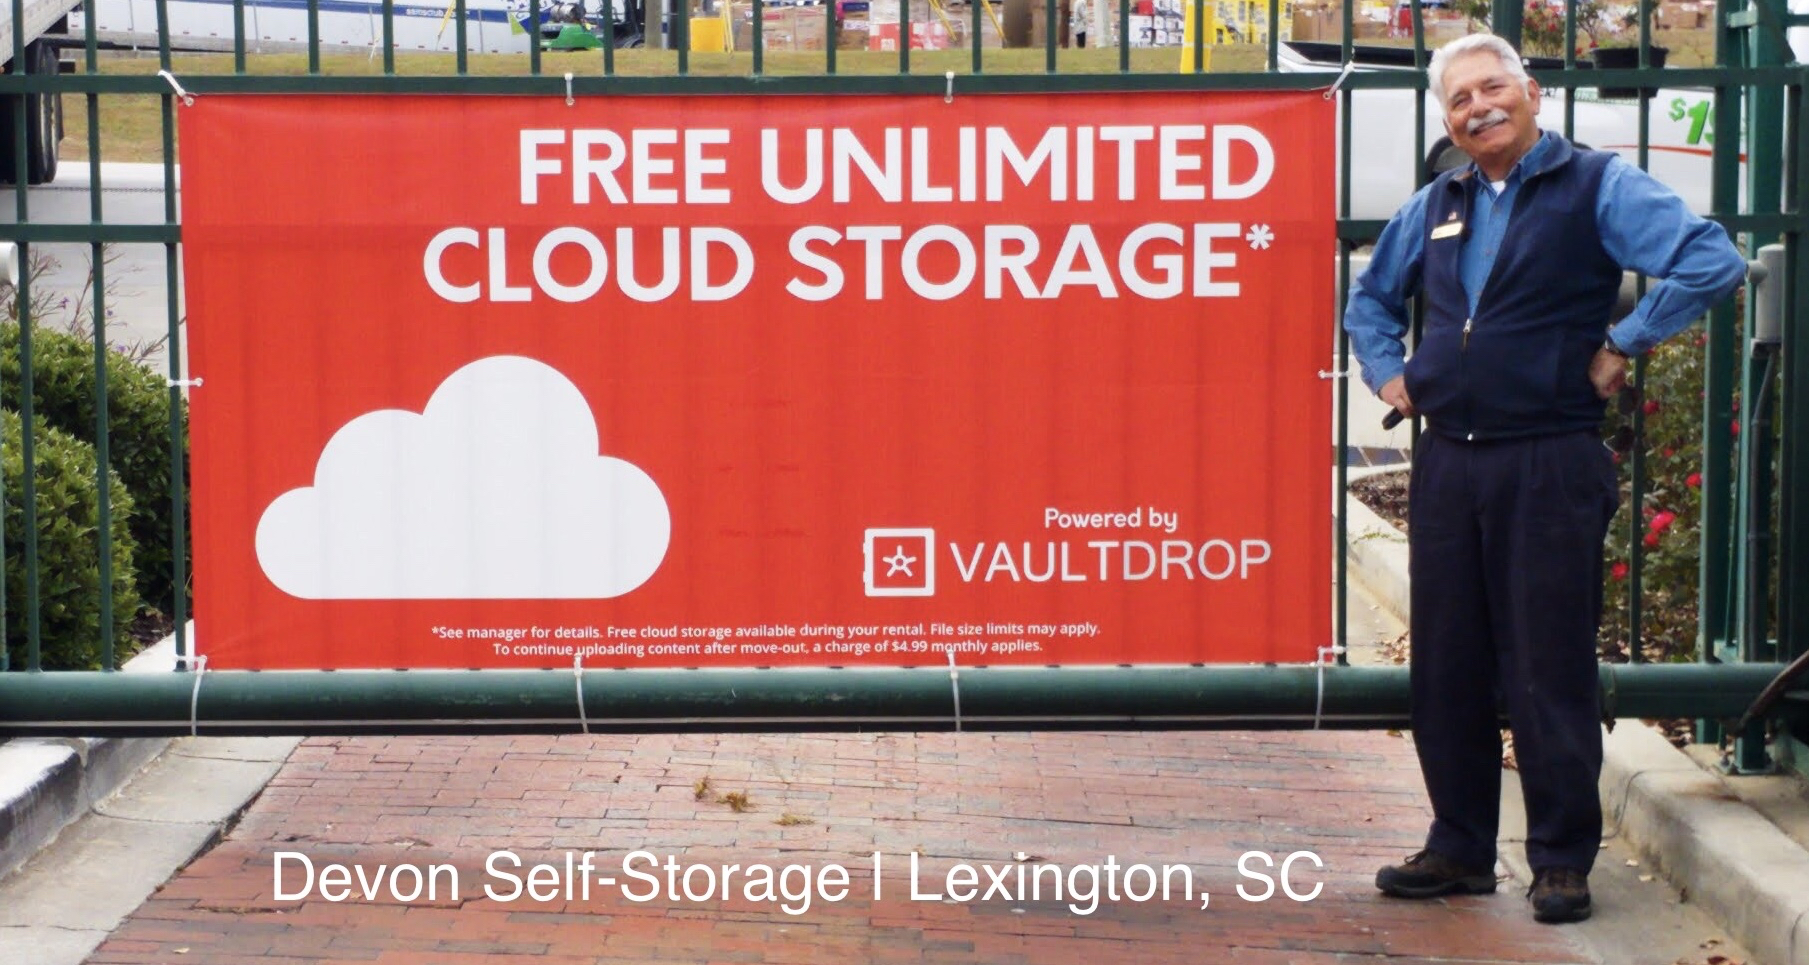 Devon Self Storage And Vaultdrop Llc Announce Free Unlimited Cloud Storage As An Amenity For Self Storage Customers